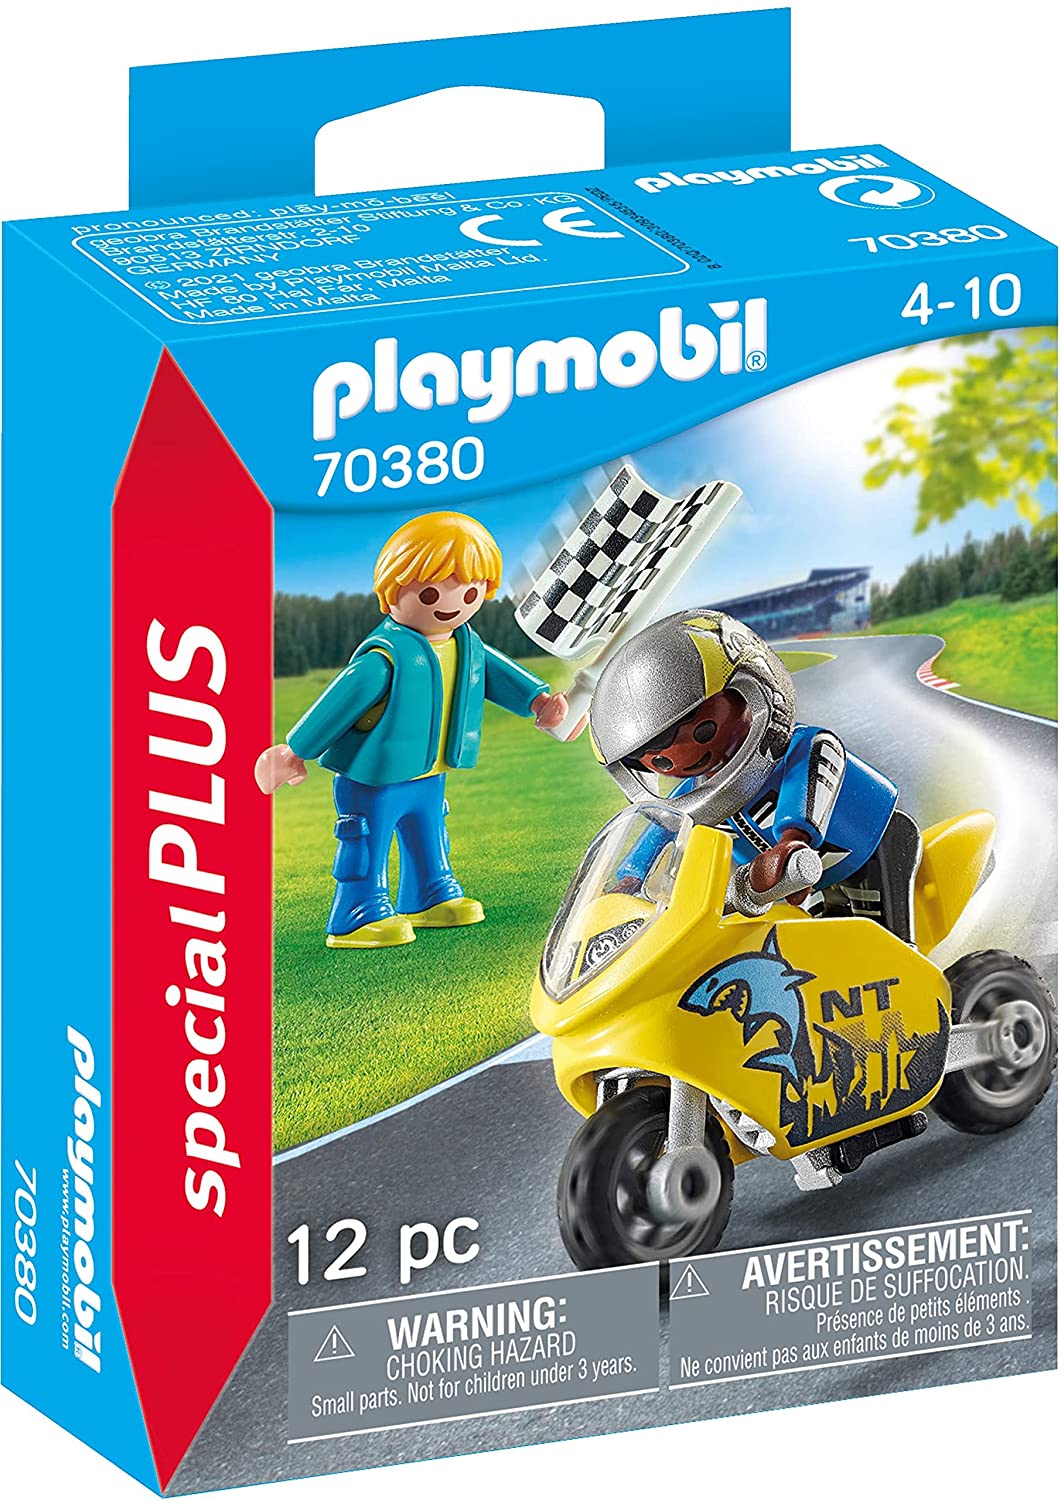 Playmobil 70380 Toys, Multicoloured, One Size